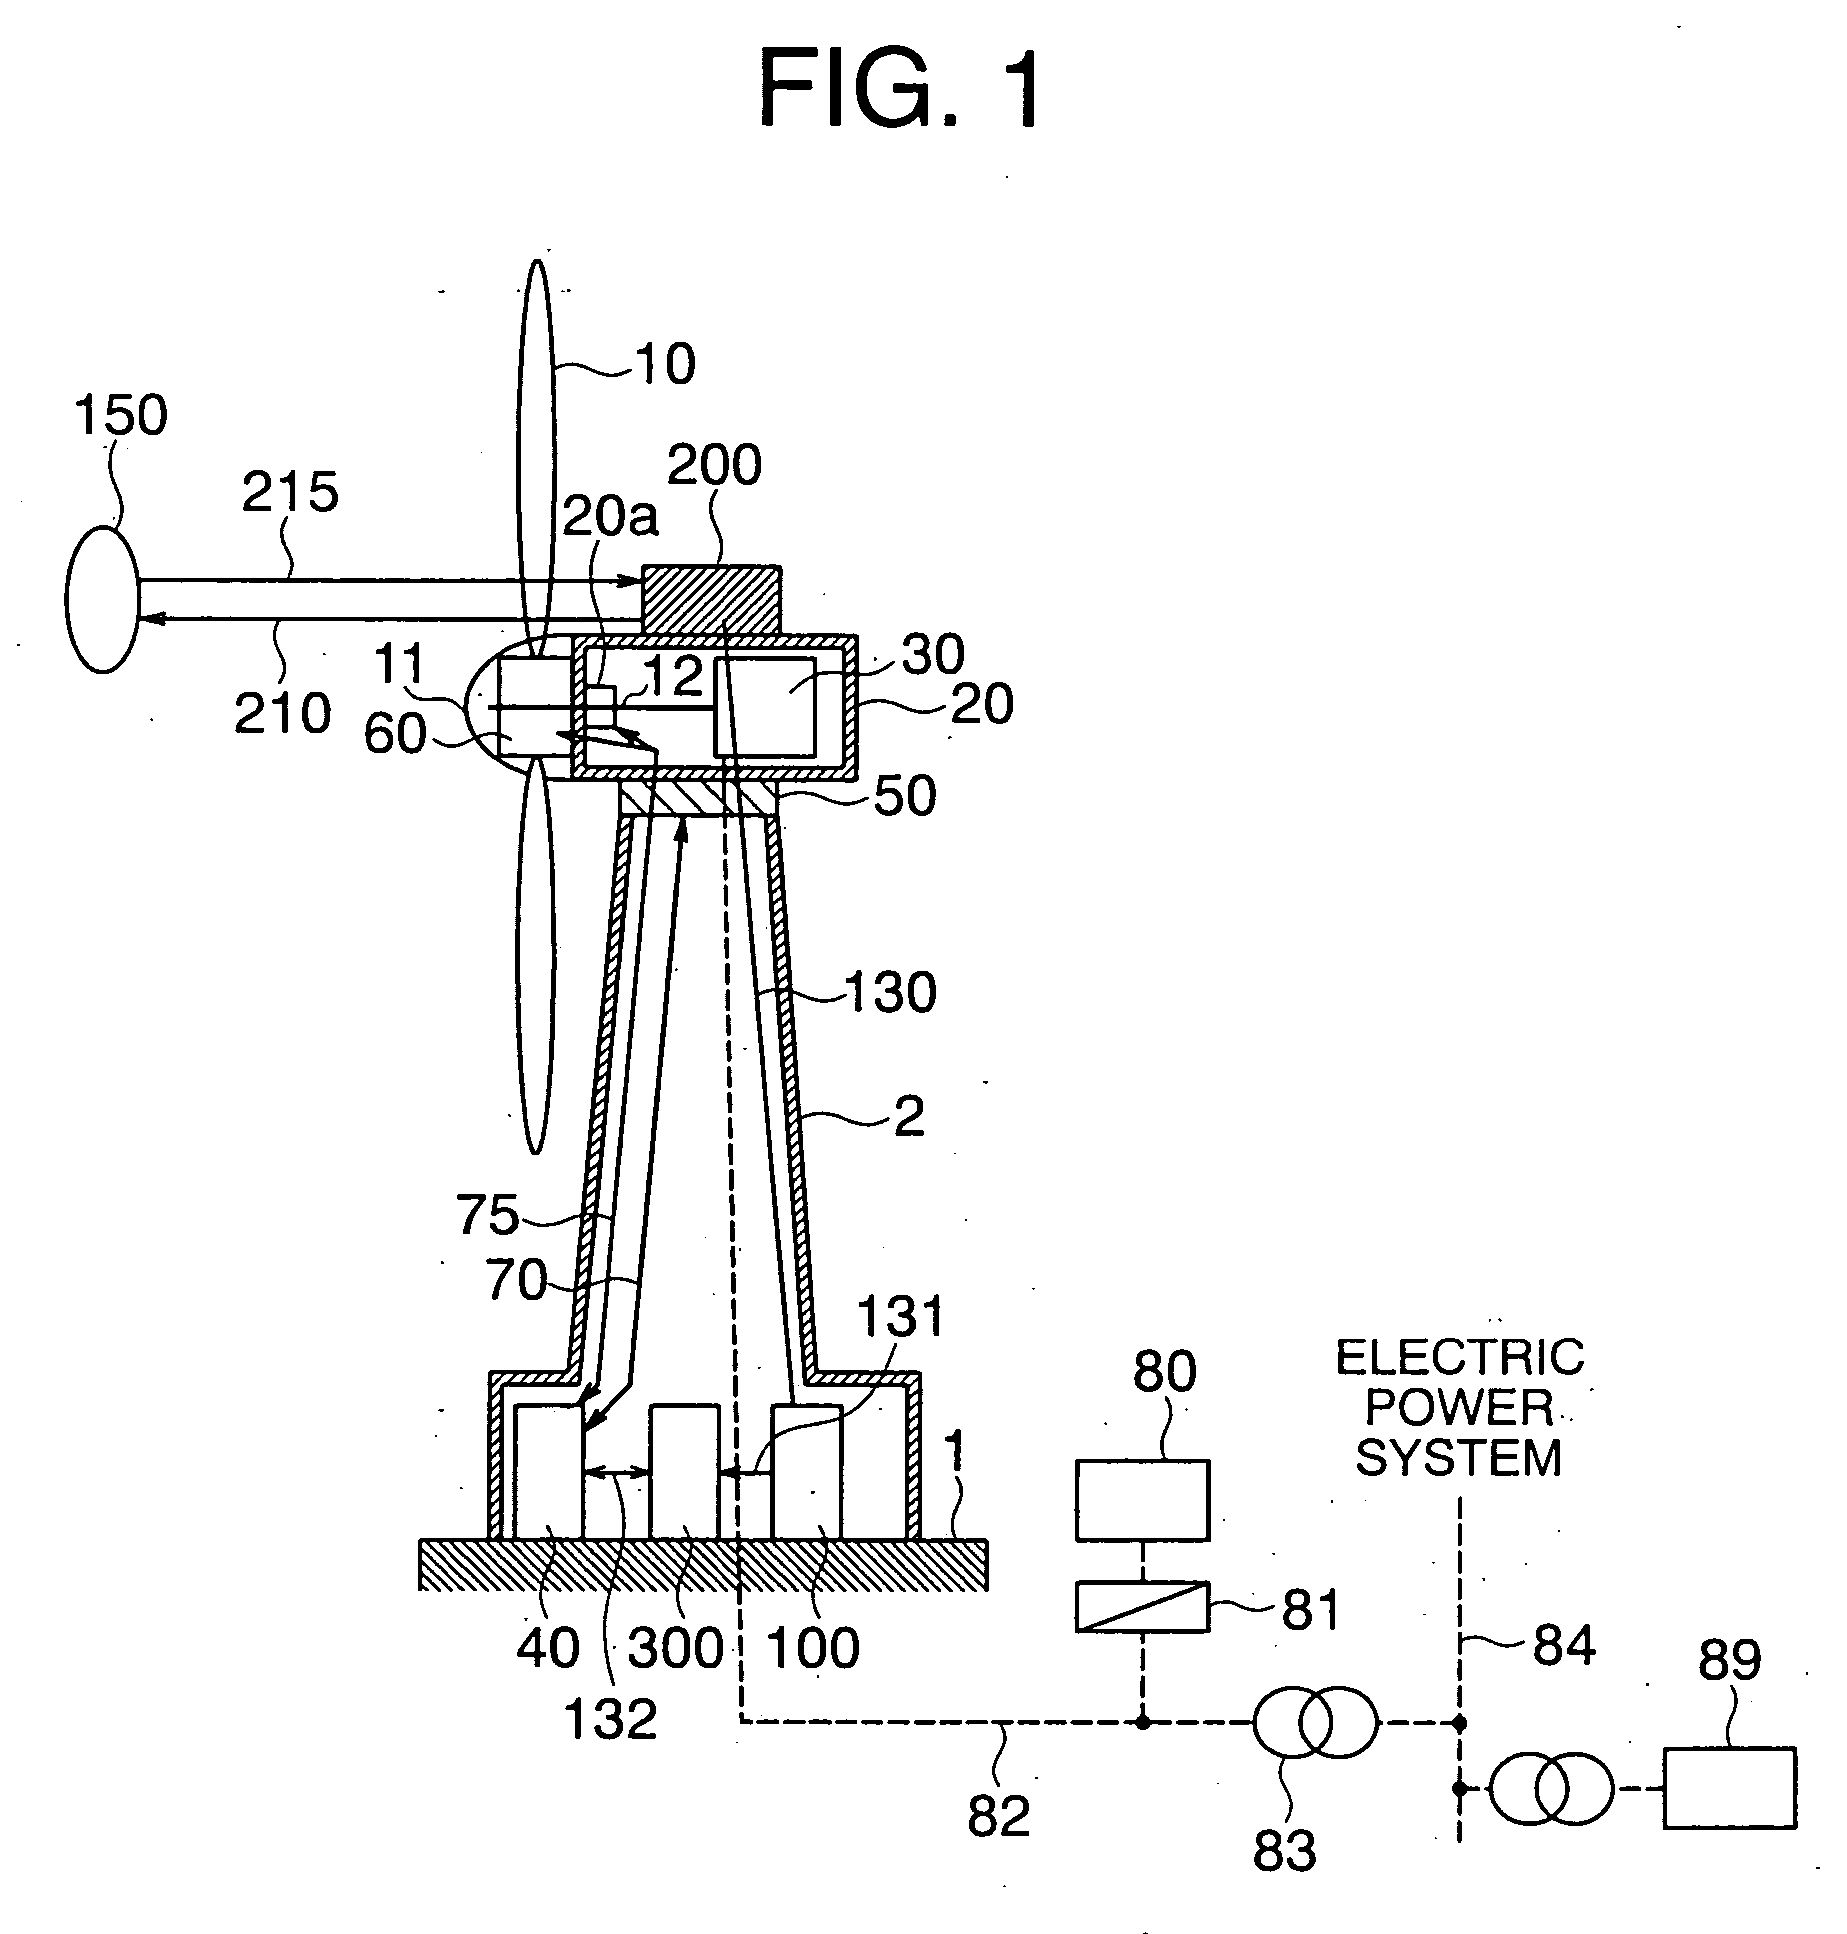 Wind power generation evaluation system and predictive control service system for use with wind power generator